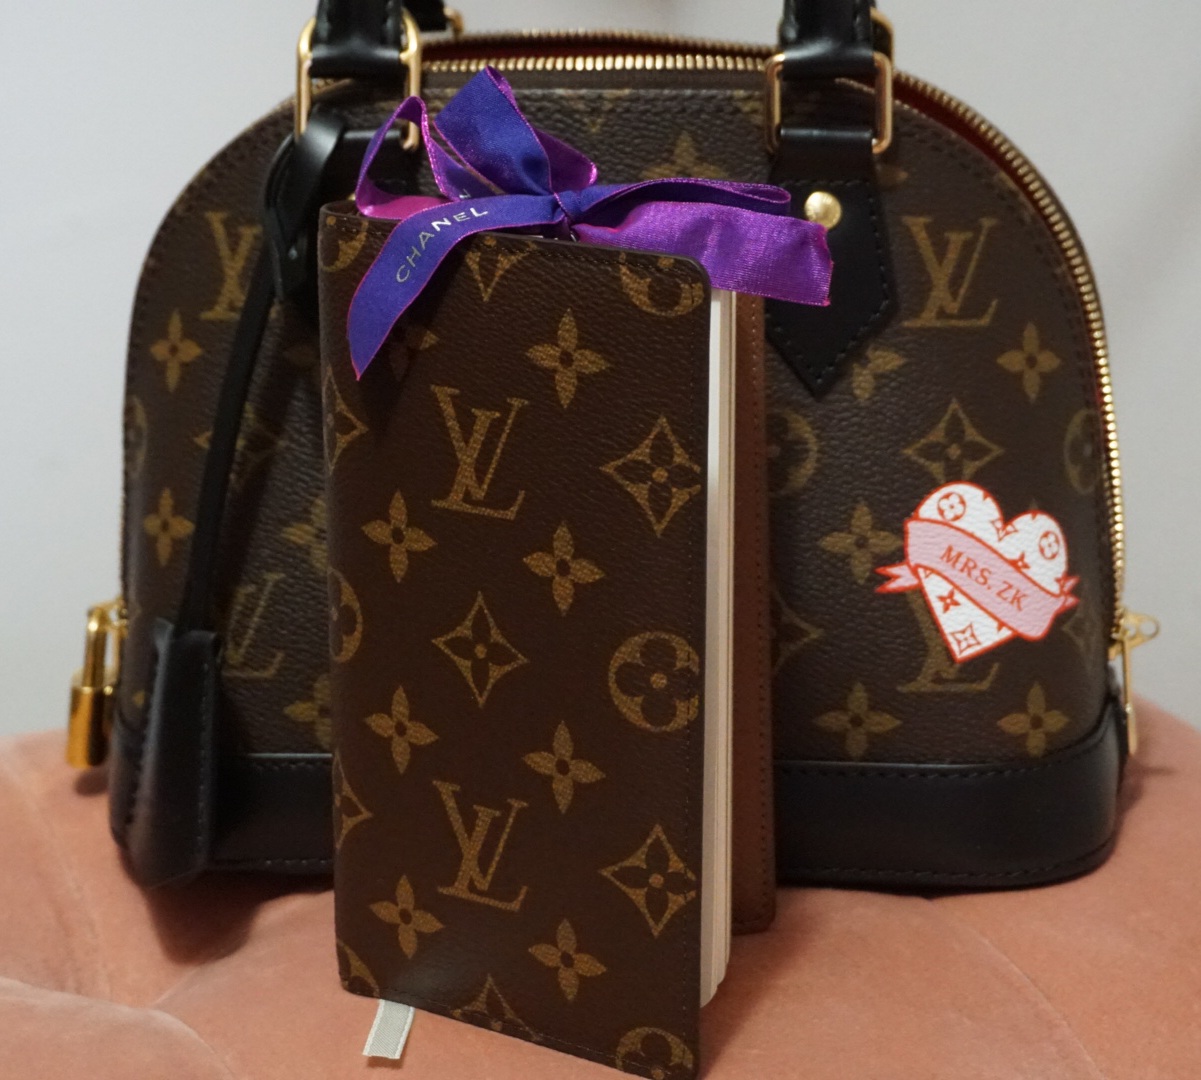 MY TOP LOUIS VUITTON TRAVEL SLG's - How I Pack Them